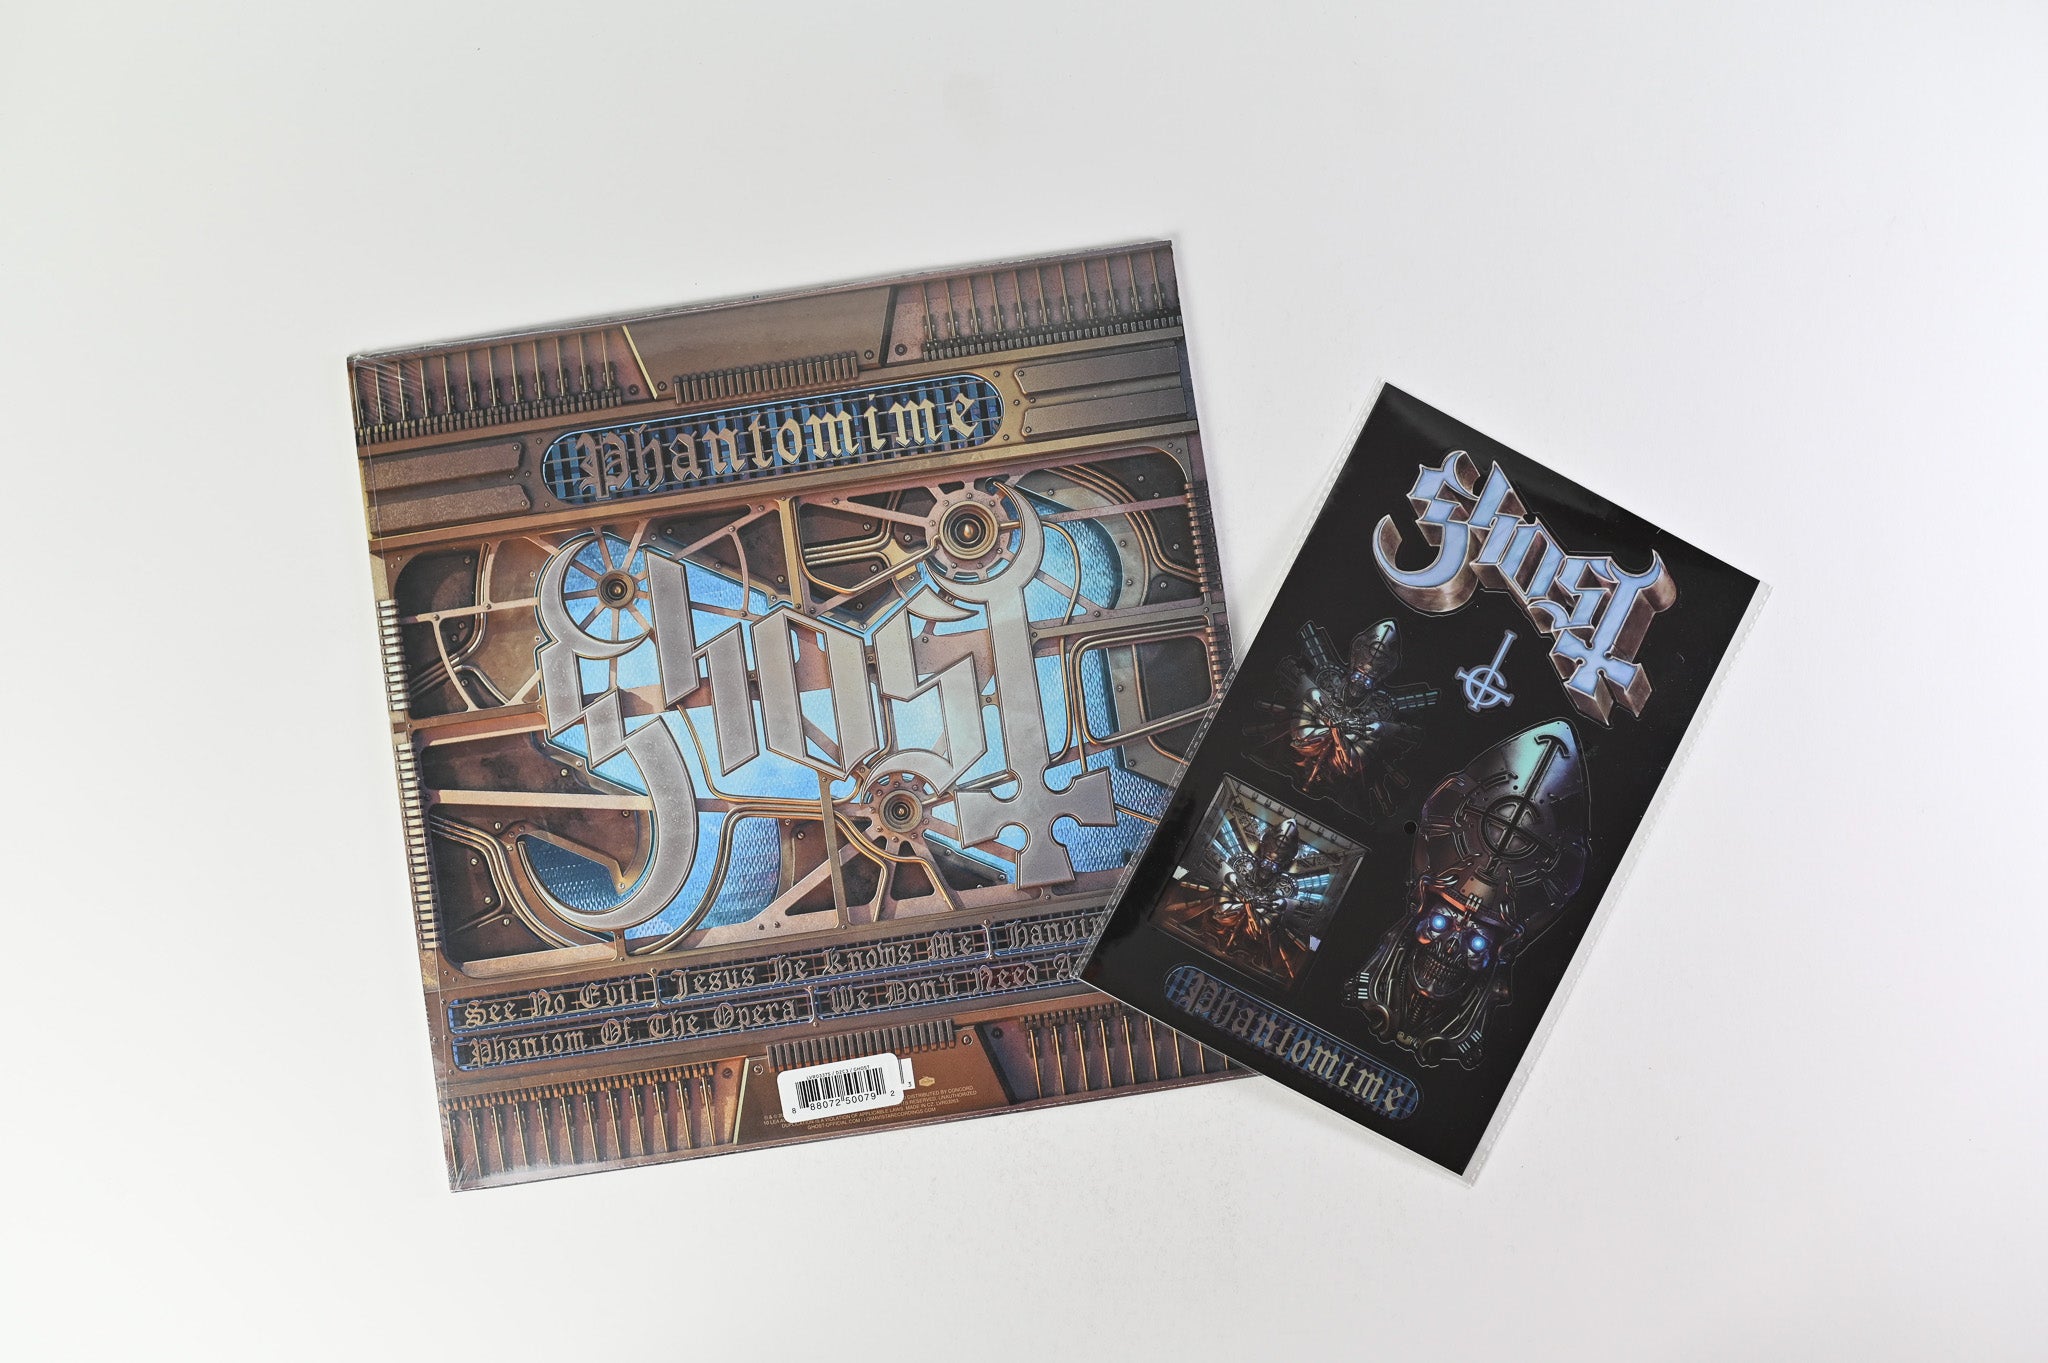 Ghost - Phantomime on Loma Vista Ltd Smoke Marble With Stickers Sealed